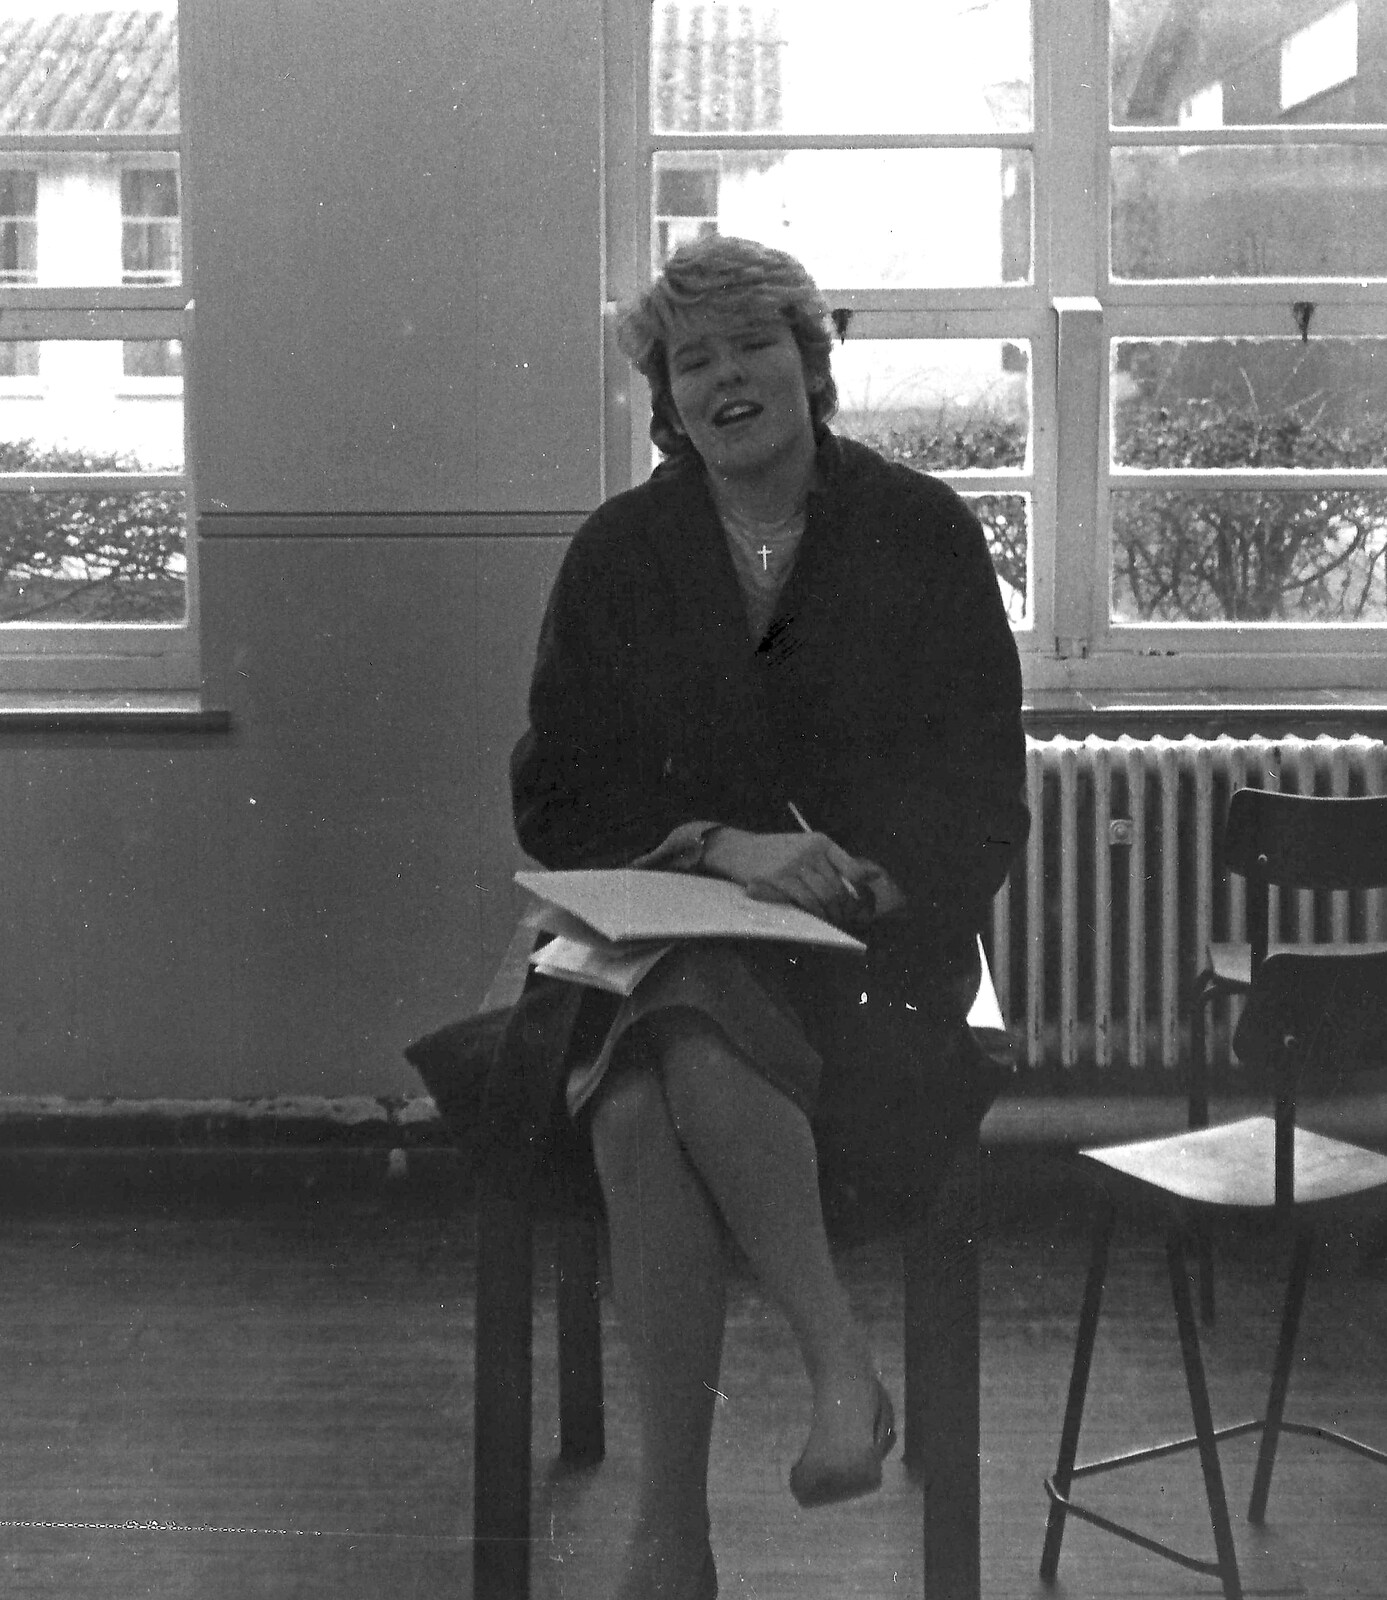 Jo funnel thinks of what to write from Learning Black-and-White Photography, Brockenhurst College, Hampshire - 10th March 1985